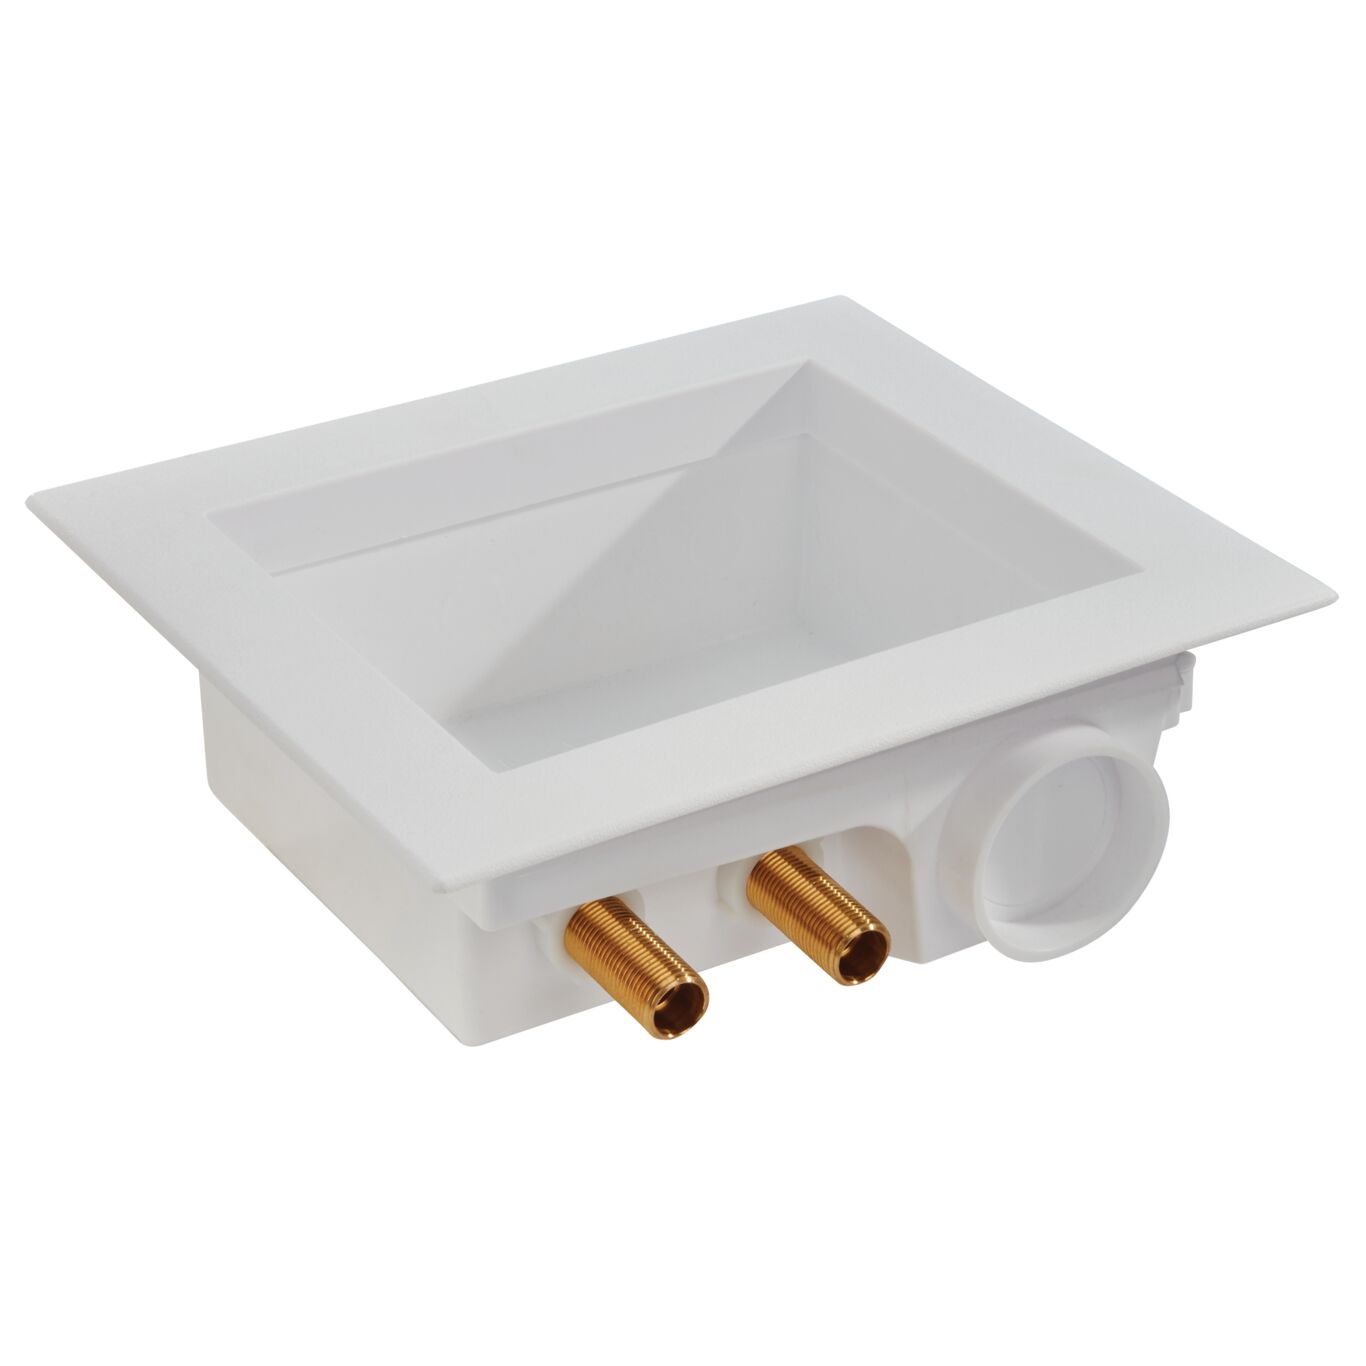 Product Image - Wallbox for A2C-SC-WB